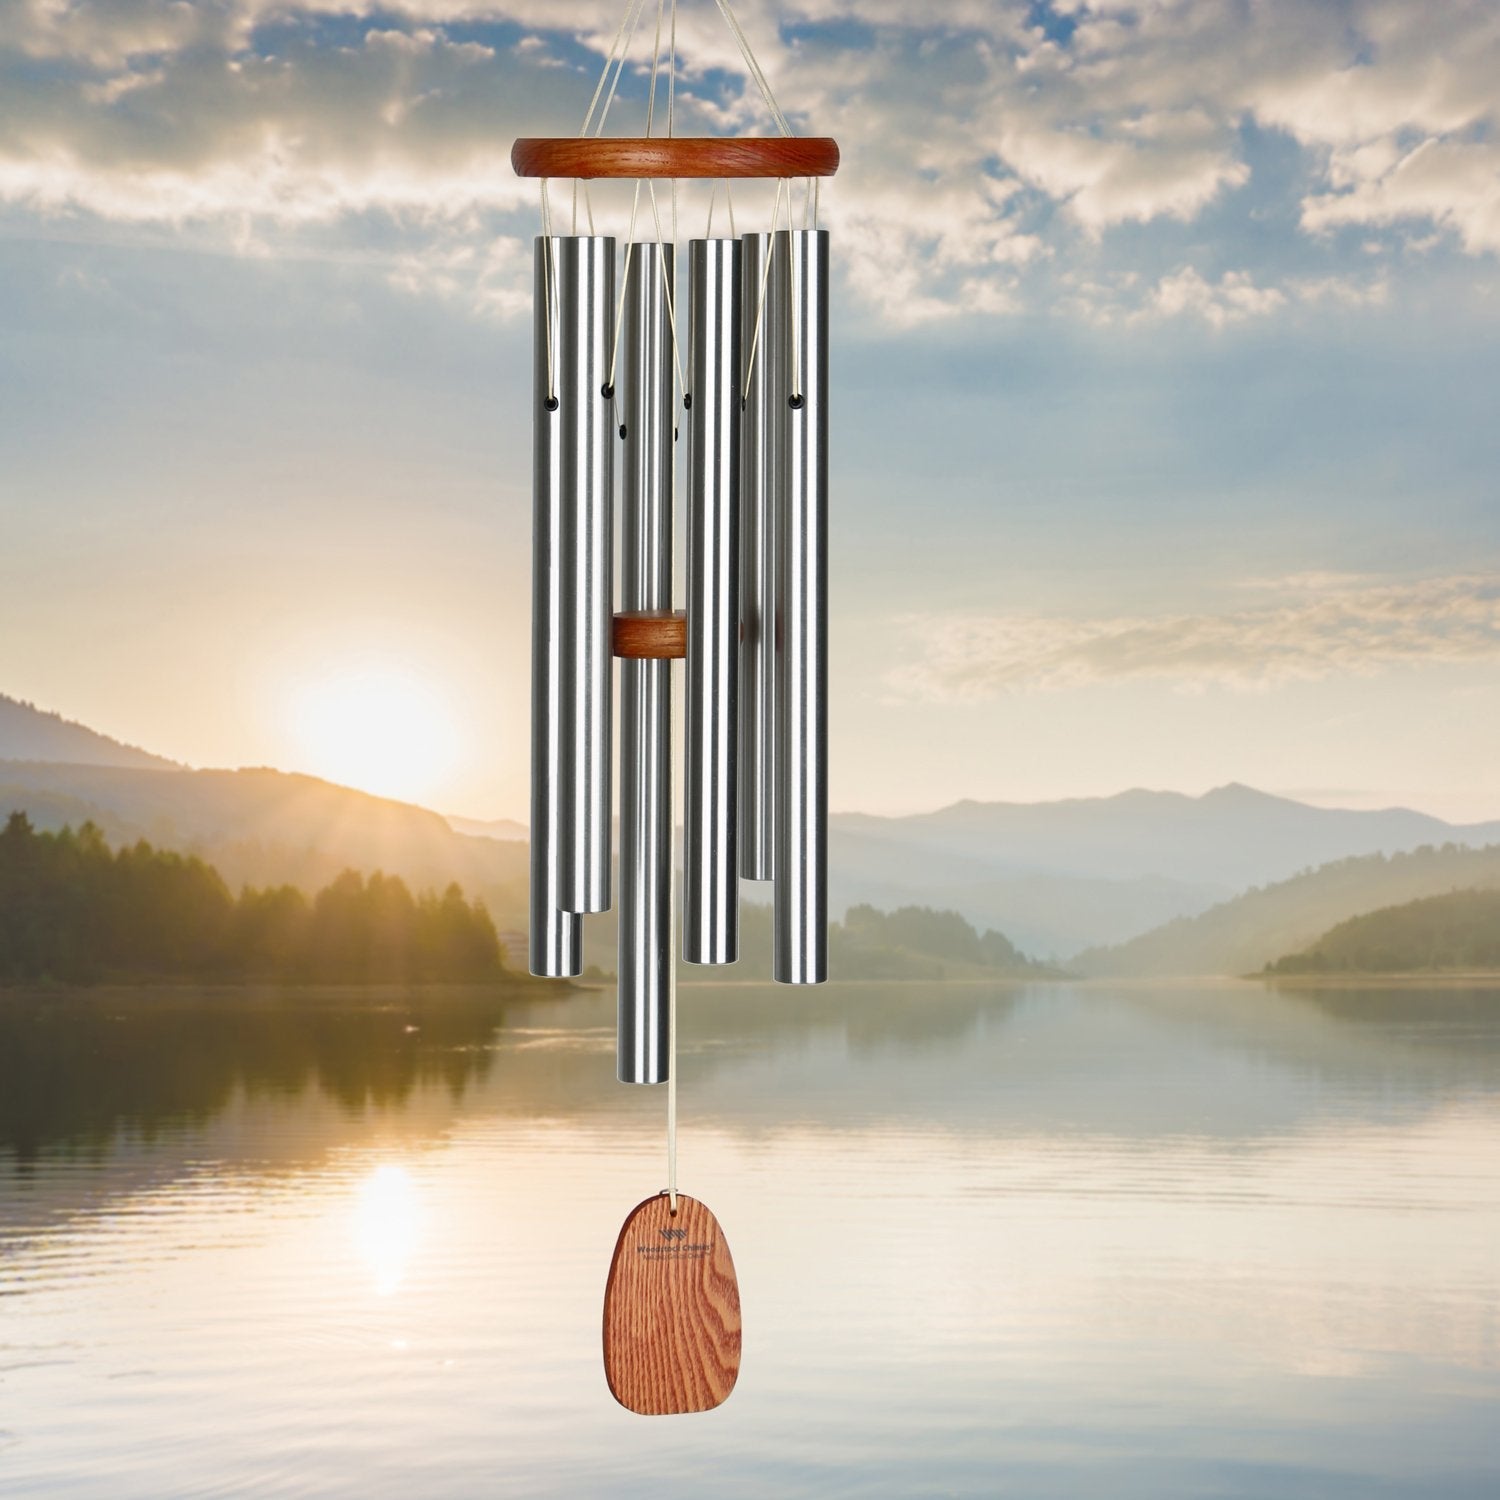 chime with mountain lake scene in background.